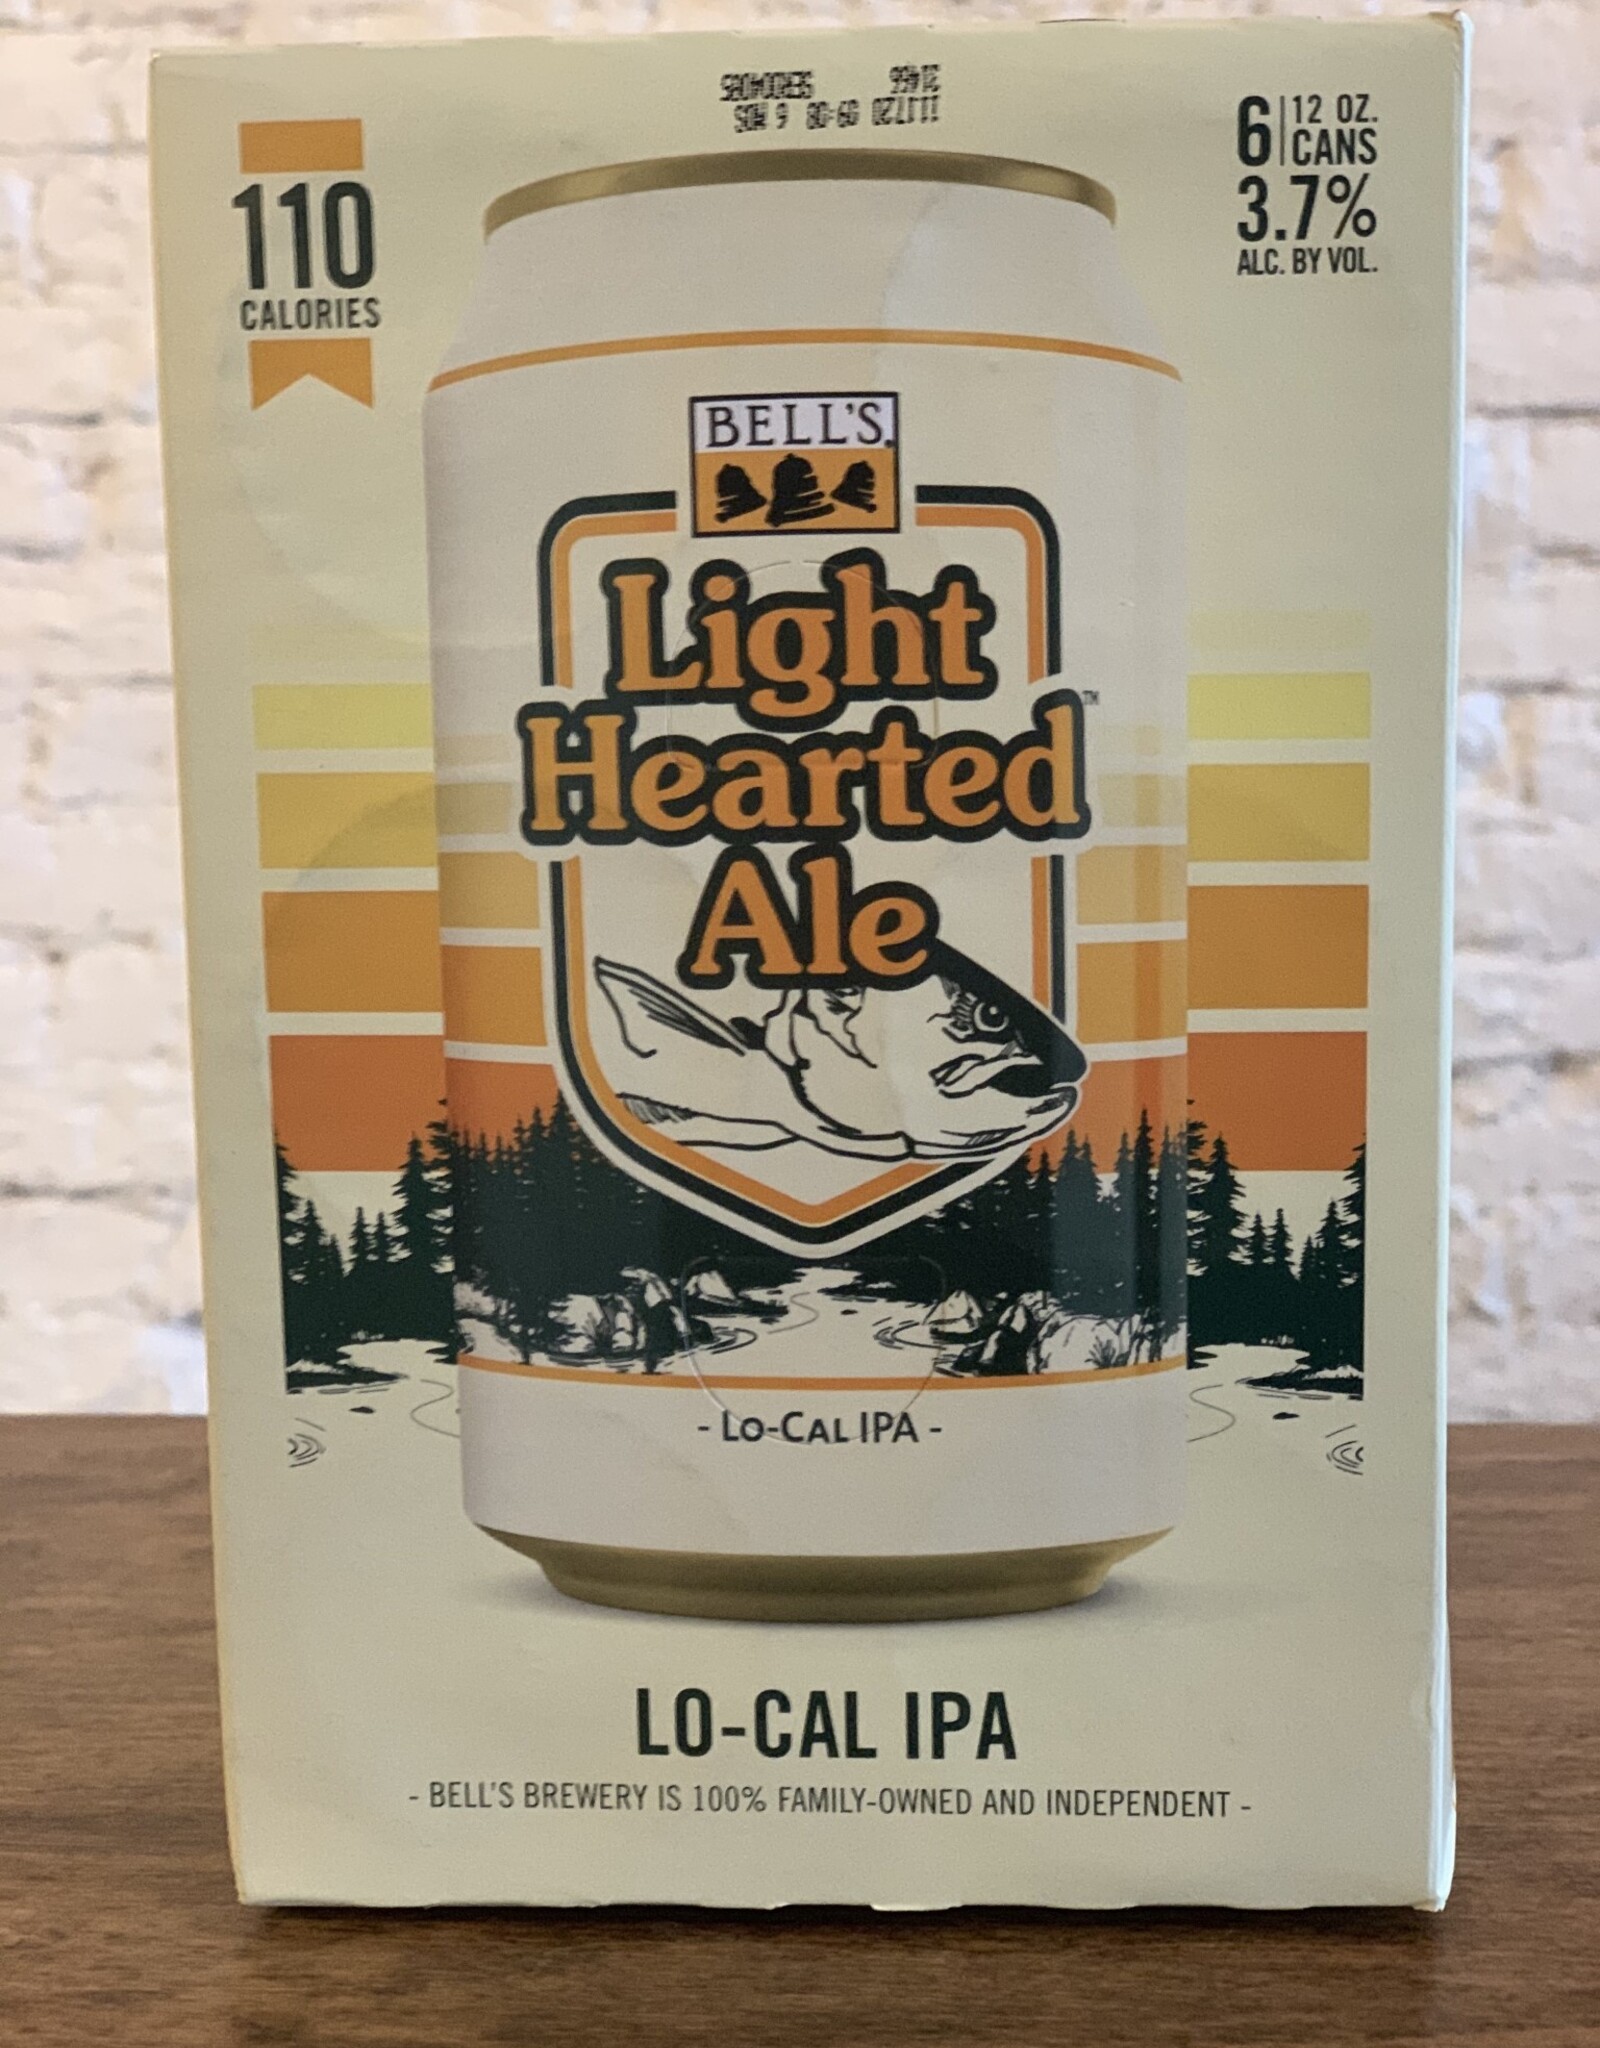 Bell's Bell's Light Hearted Ale